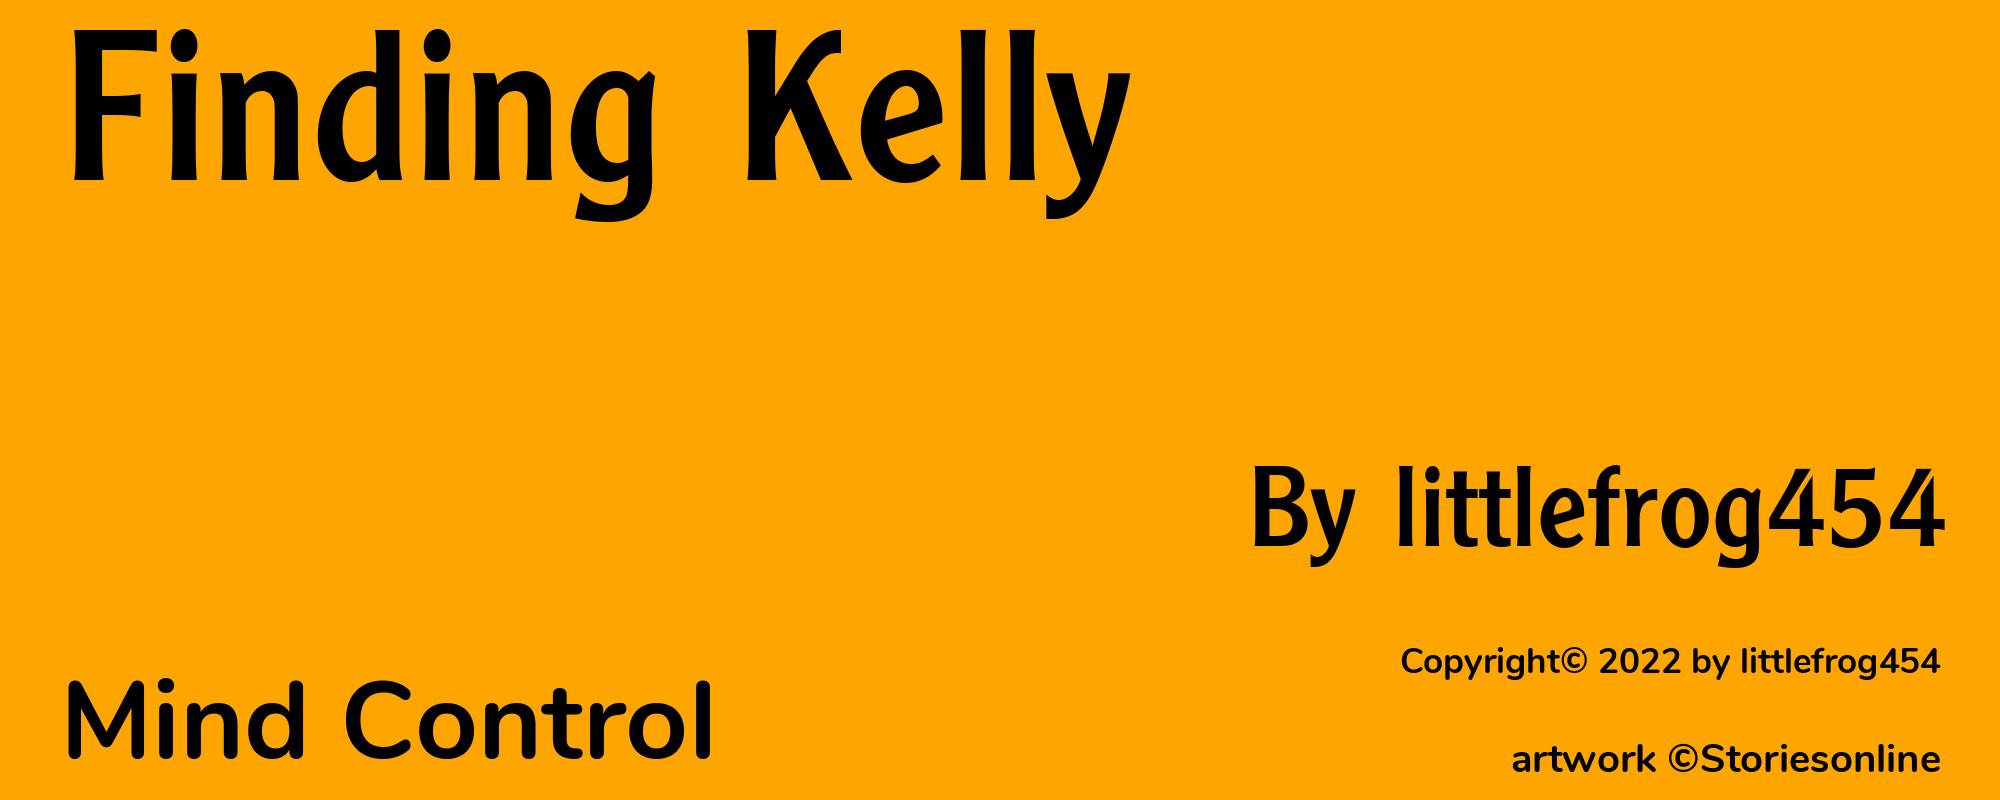 Finding Kelly - Cover